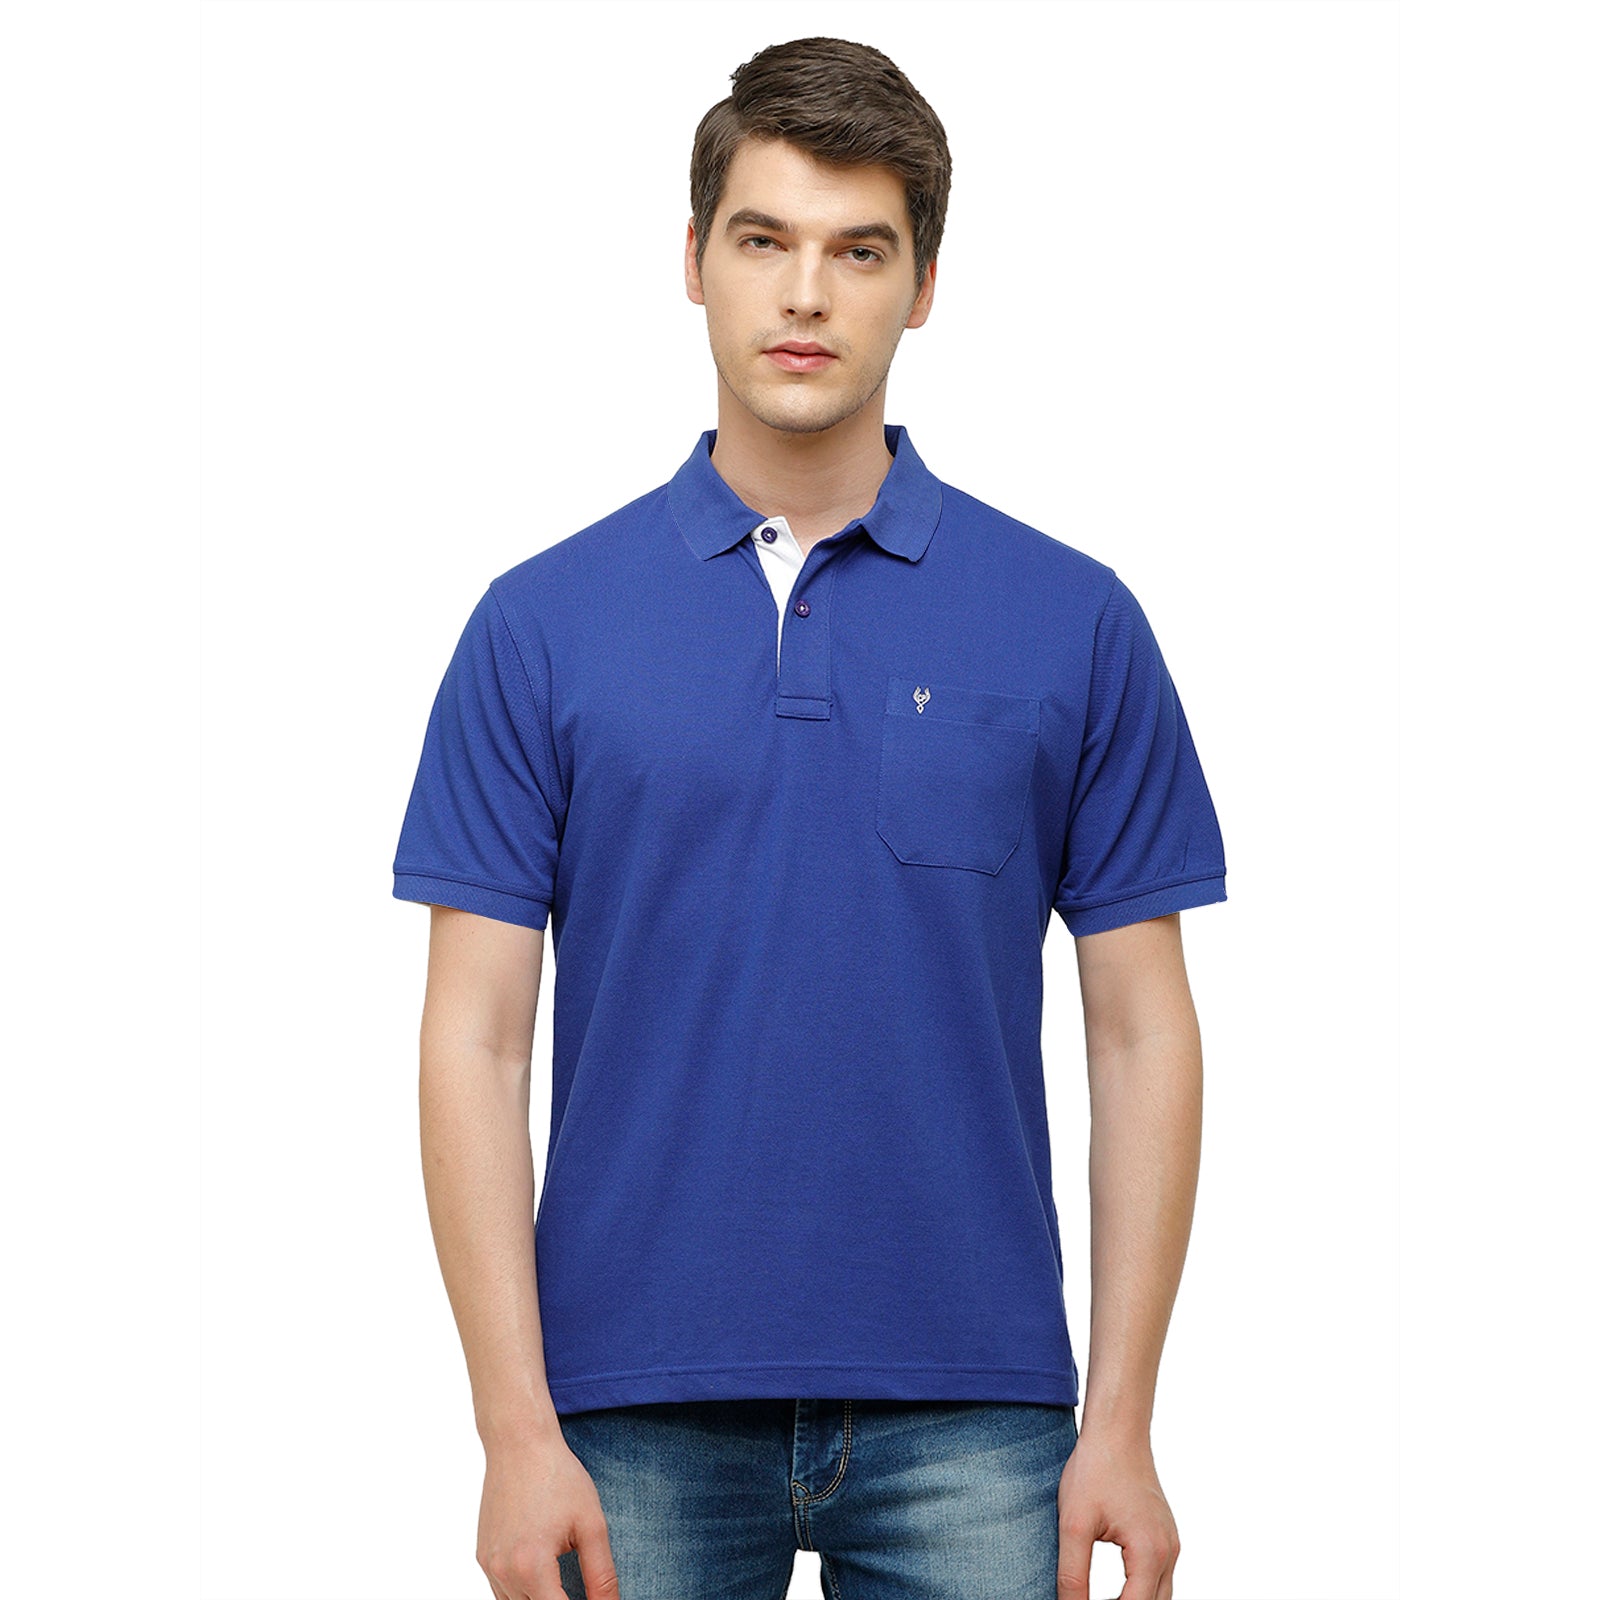 Classic Polo Navy Blue Polo Neck Authentic Fit T Shirt Men - 4SSN 204 T-shirt Classic Polo 